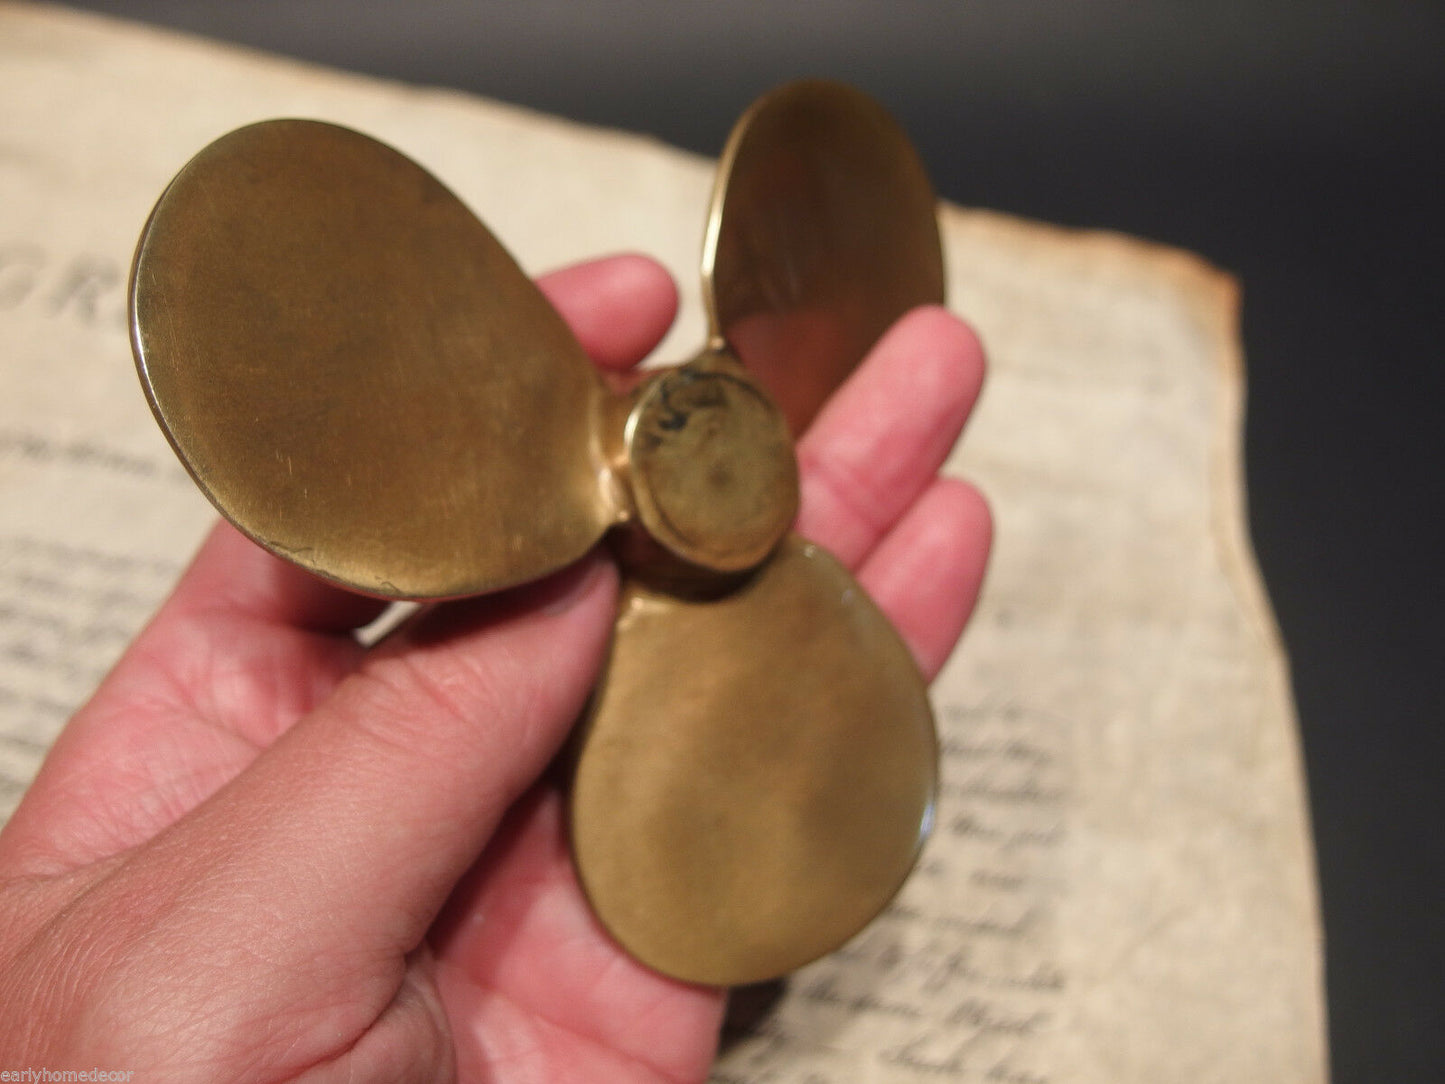 Vintage Antique Style Brass Nautical Boat Propeller Paperweight Desk Figure - Early Home Decor